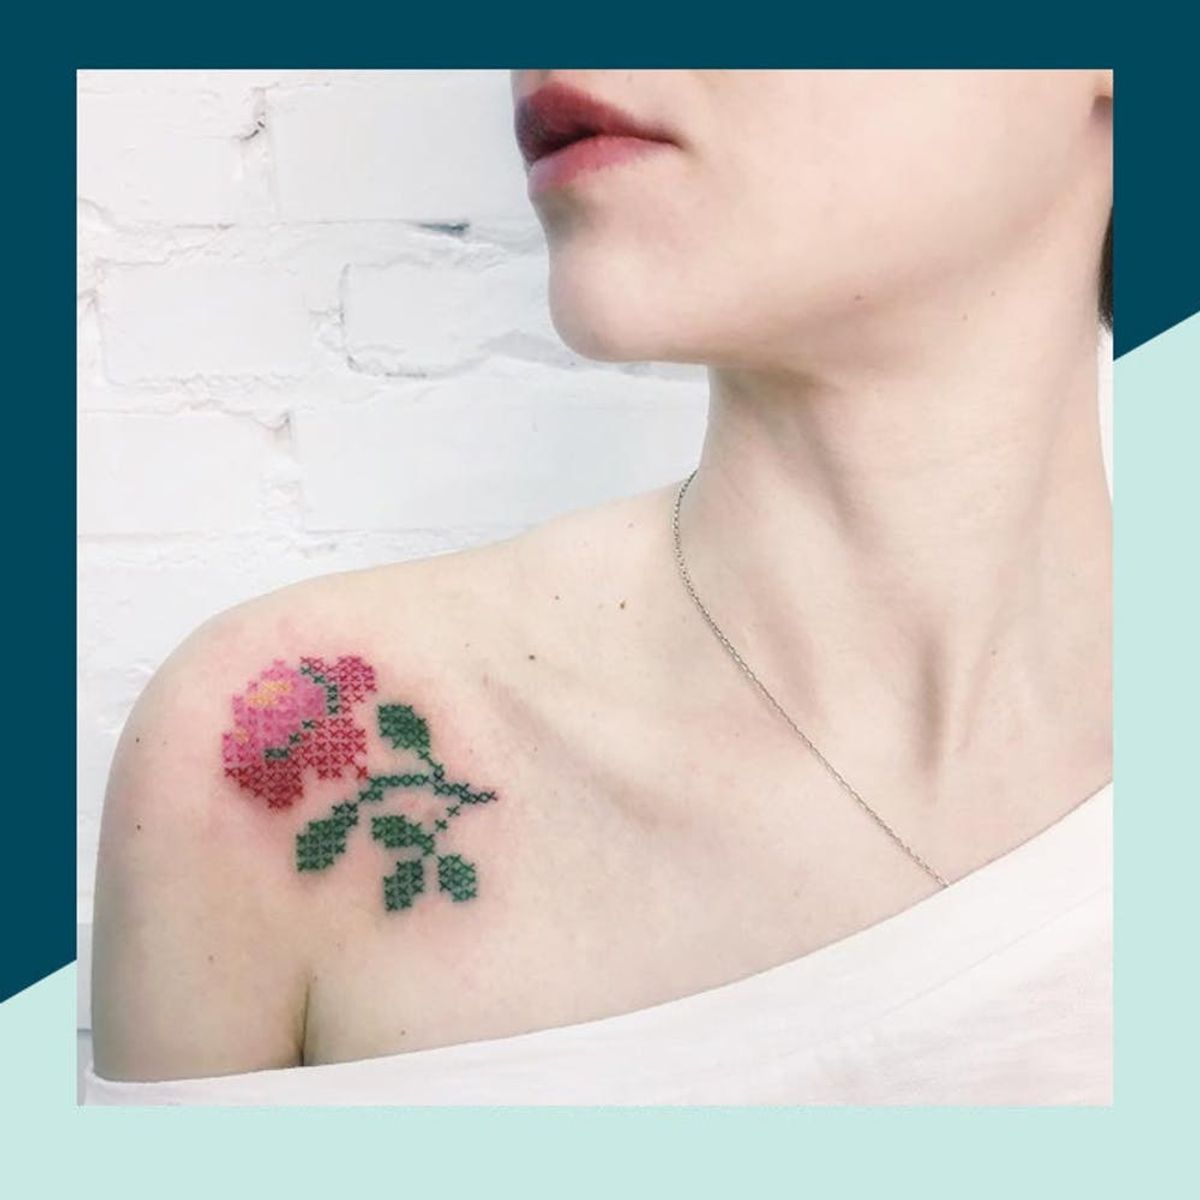 13 Embroidery Tattoos That Would Make Even Grandma Happy